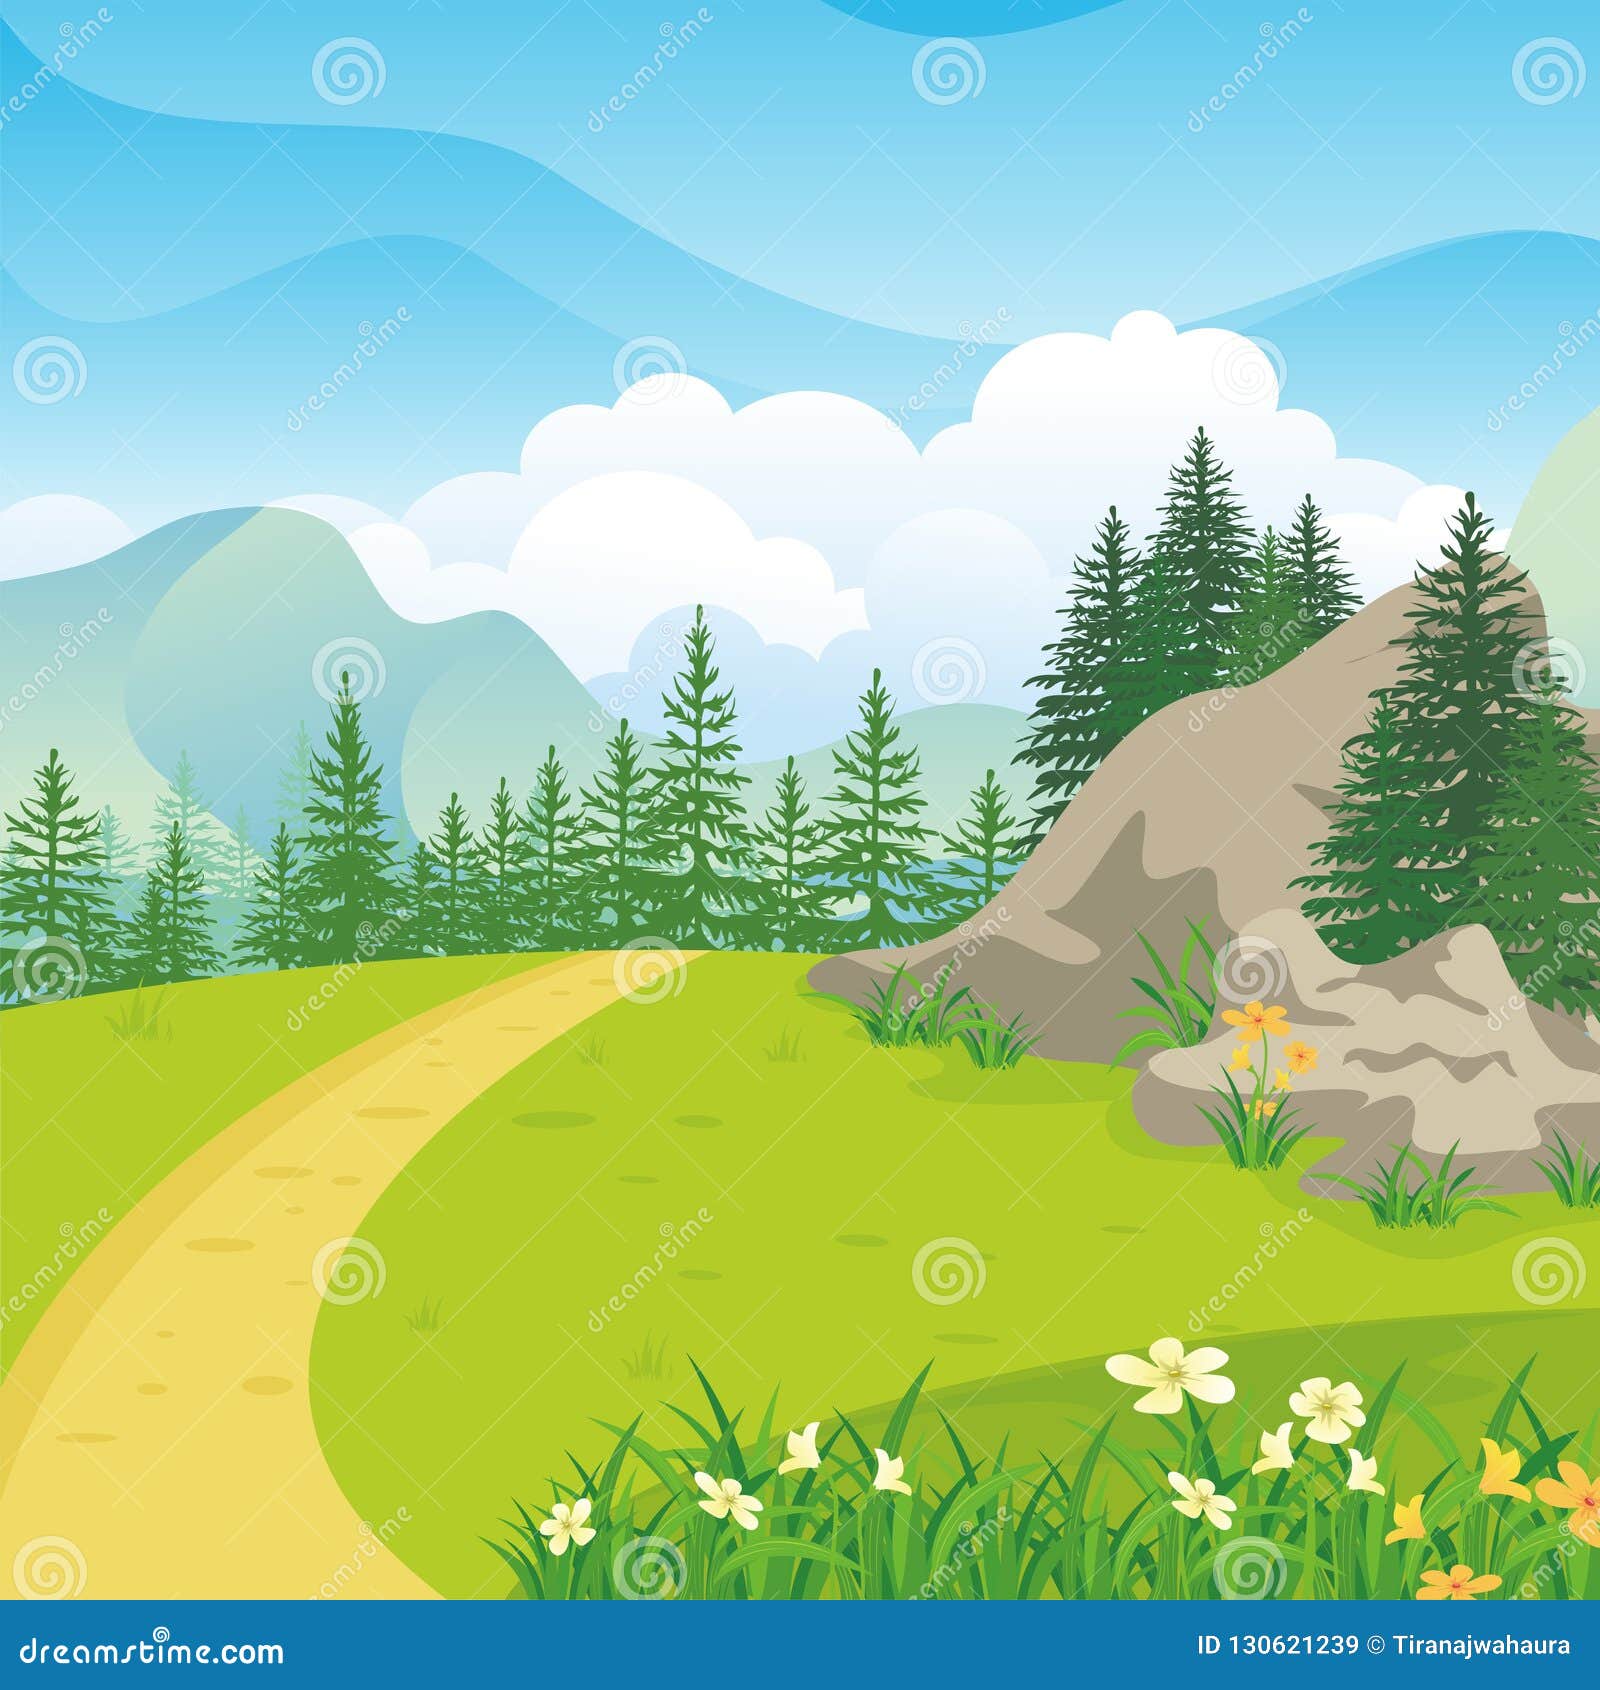 Beautiful Landscape with Rocky Hill, Lovely and Cute Scenery Cartoon ...